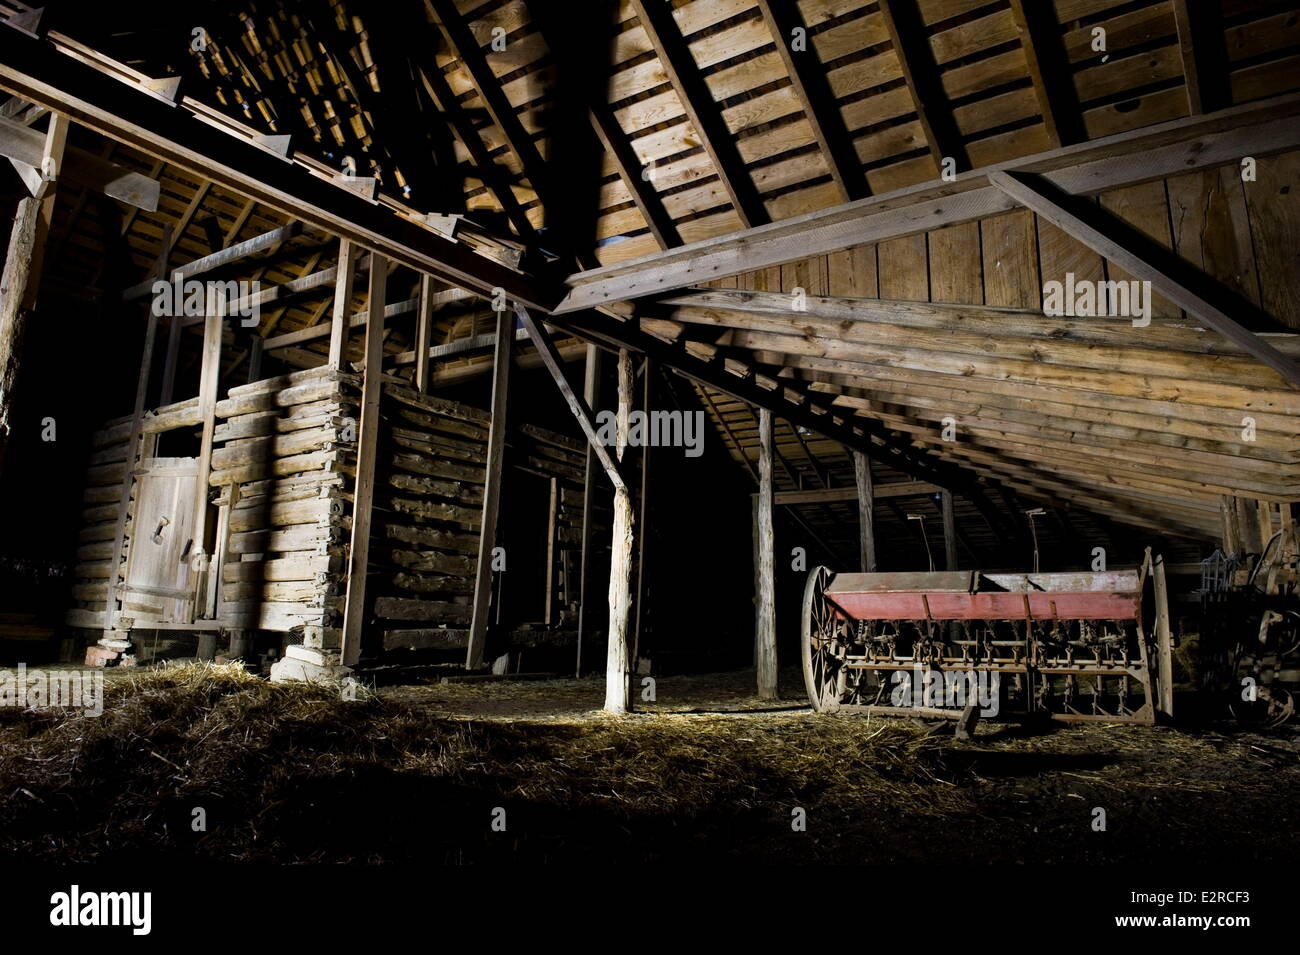 Cedar Hill, Texas, USA. 14th Feb, 2014. The interior of an old barn at Penn Farm Agricultural Center inside Cedar Hill State Park in Cedar Hill, Texas. Penn Farm features remnants of the orginal Penn family homestead as well as reconstructed and historic buildings from the mid-1800s through the mid-1900s. © Ashley Landis/ZUMA Wire/ZUMAPRESS.com/Alamy Live News Stock Photo